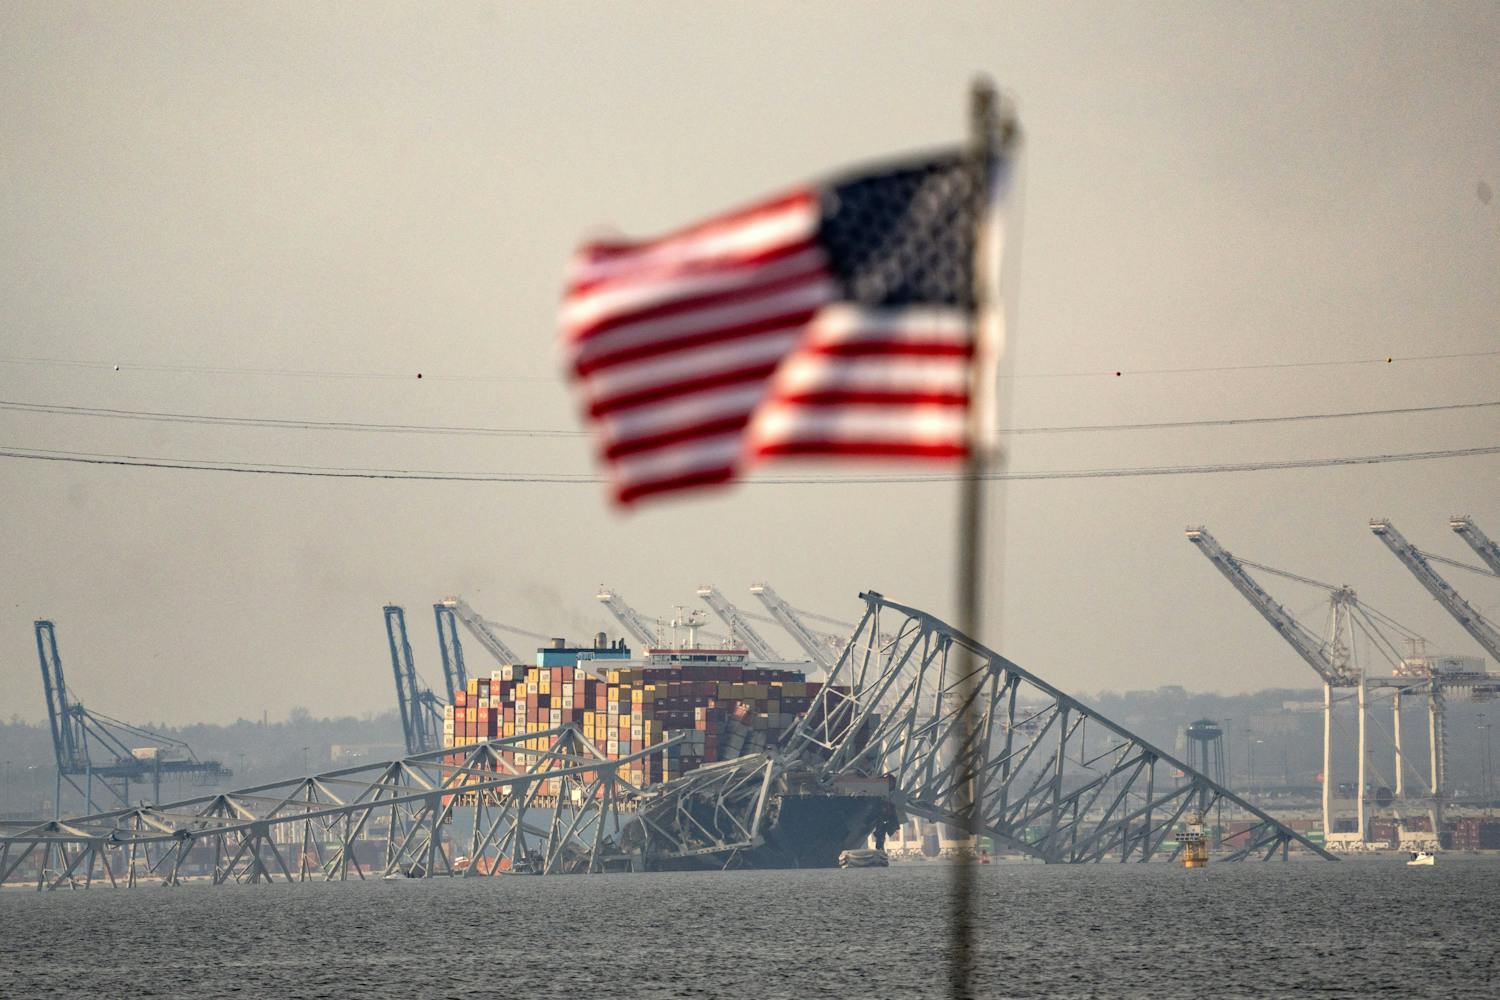 The collapse of the Baltimore Bridge has affected the US economy